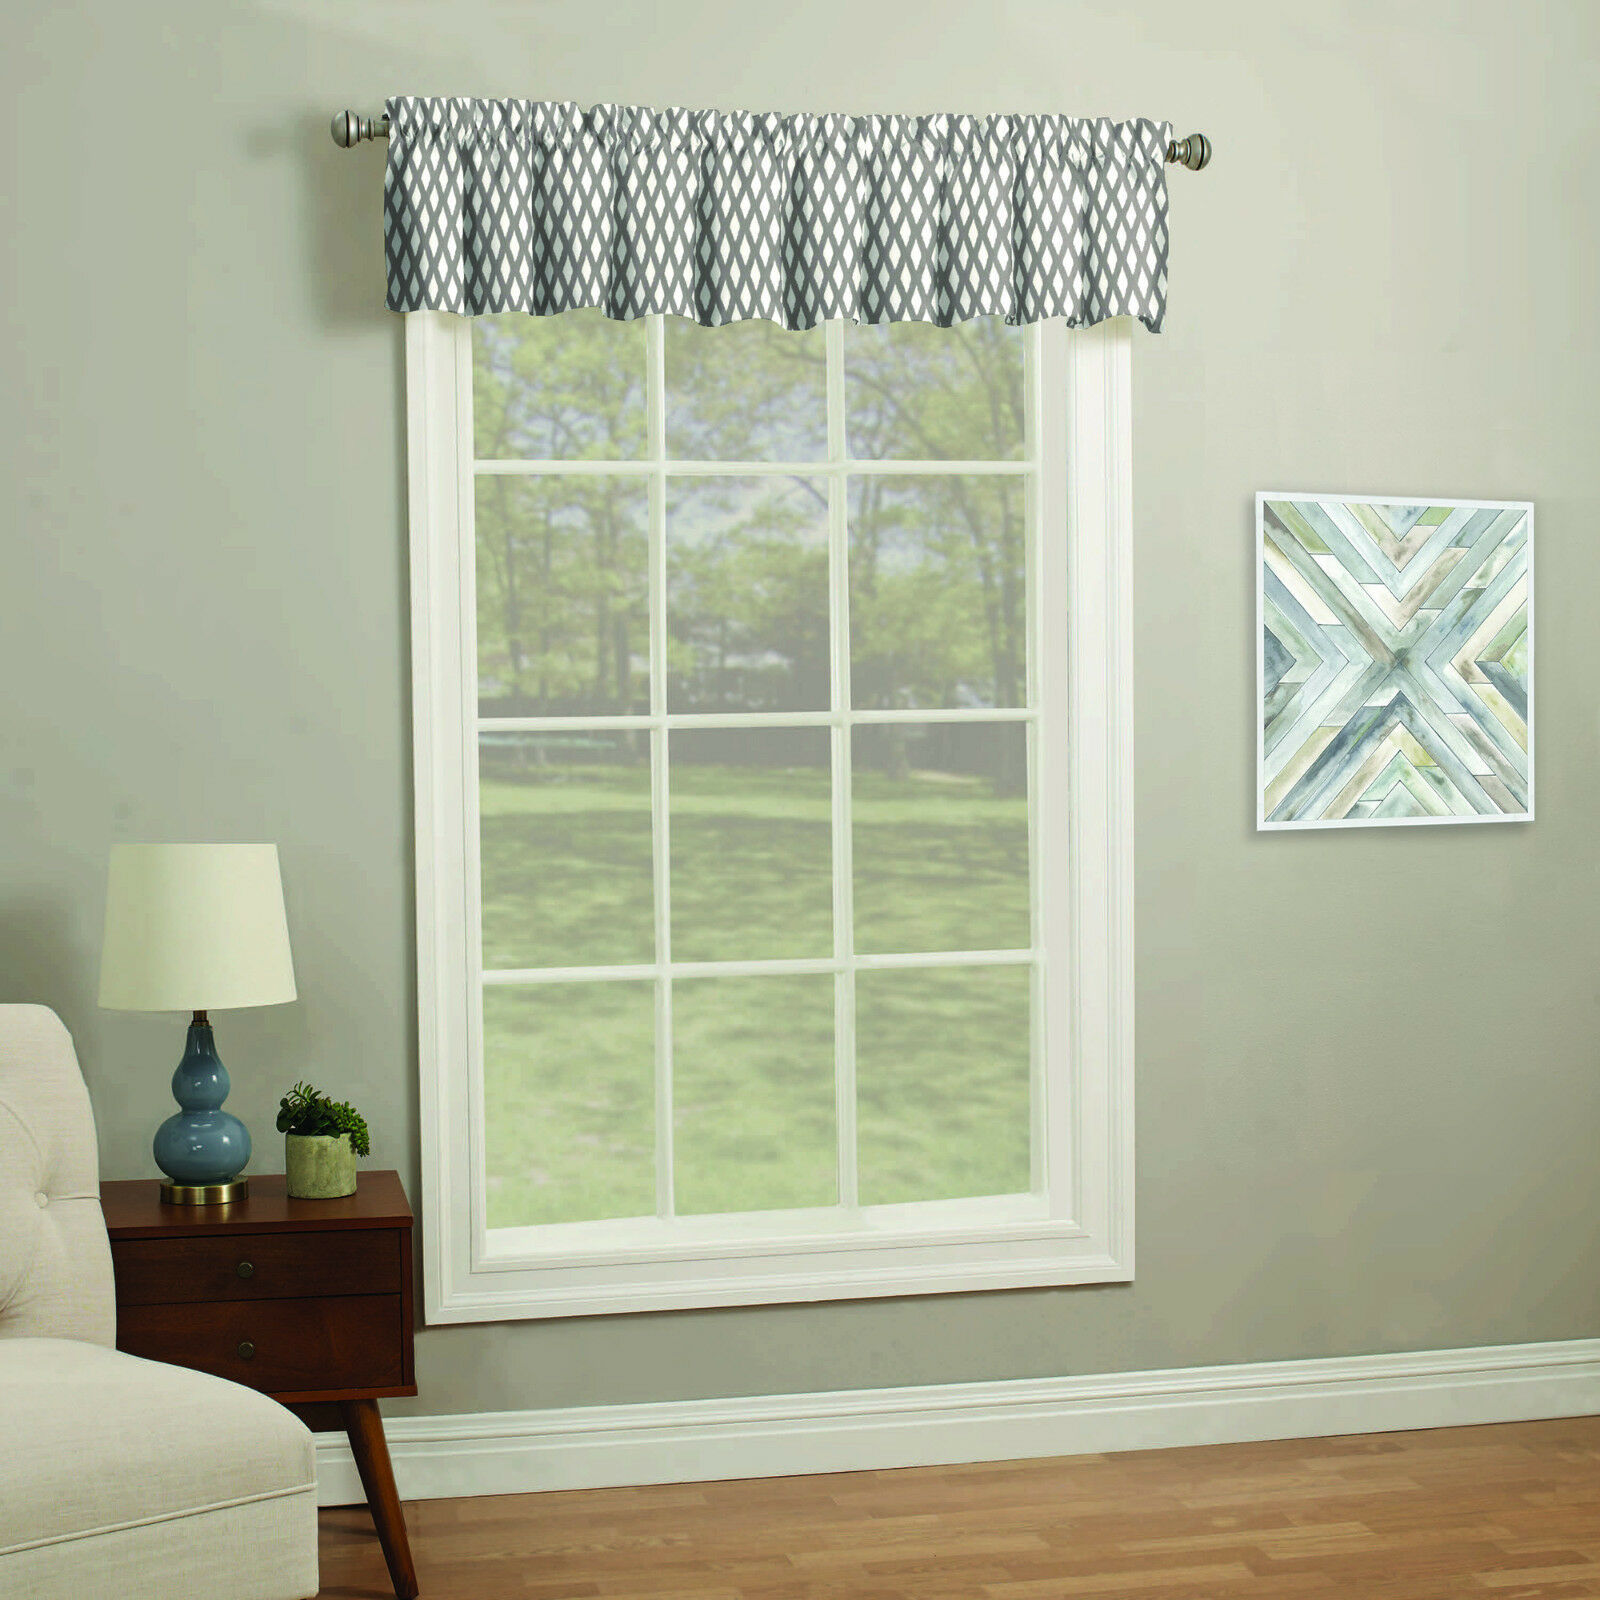 Primary image for Modern Home Fashion Trends Geometric Window Valance, Taupe/White, 56" x 14"- NEW